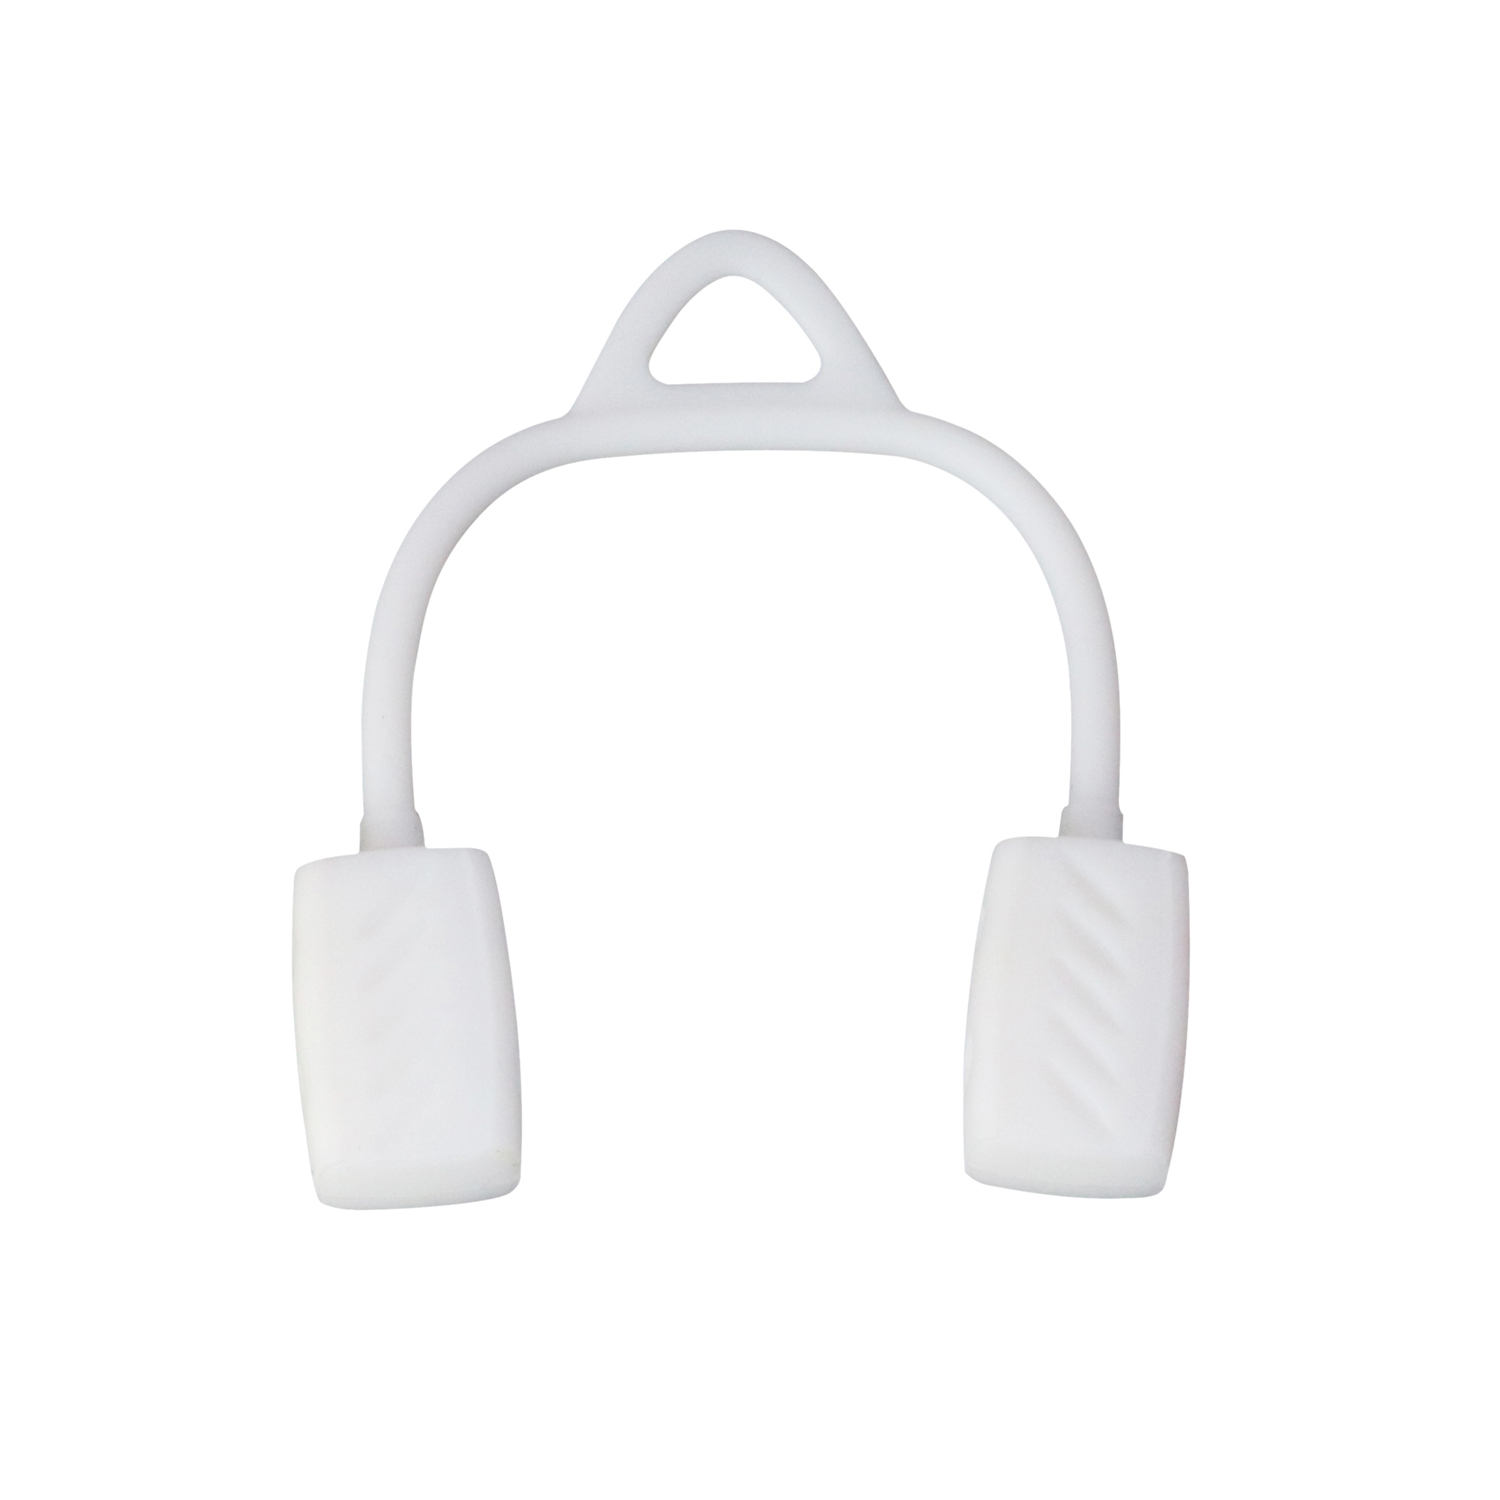 IPReereg-Unisex-Facial-Masseter-Safety-Silicone-Chew-Bite-Breaker-Jaw-Muscle-Trainer-Facial-Part-Tra-1769003-7